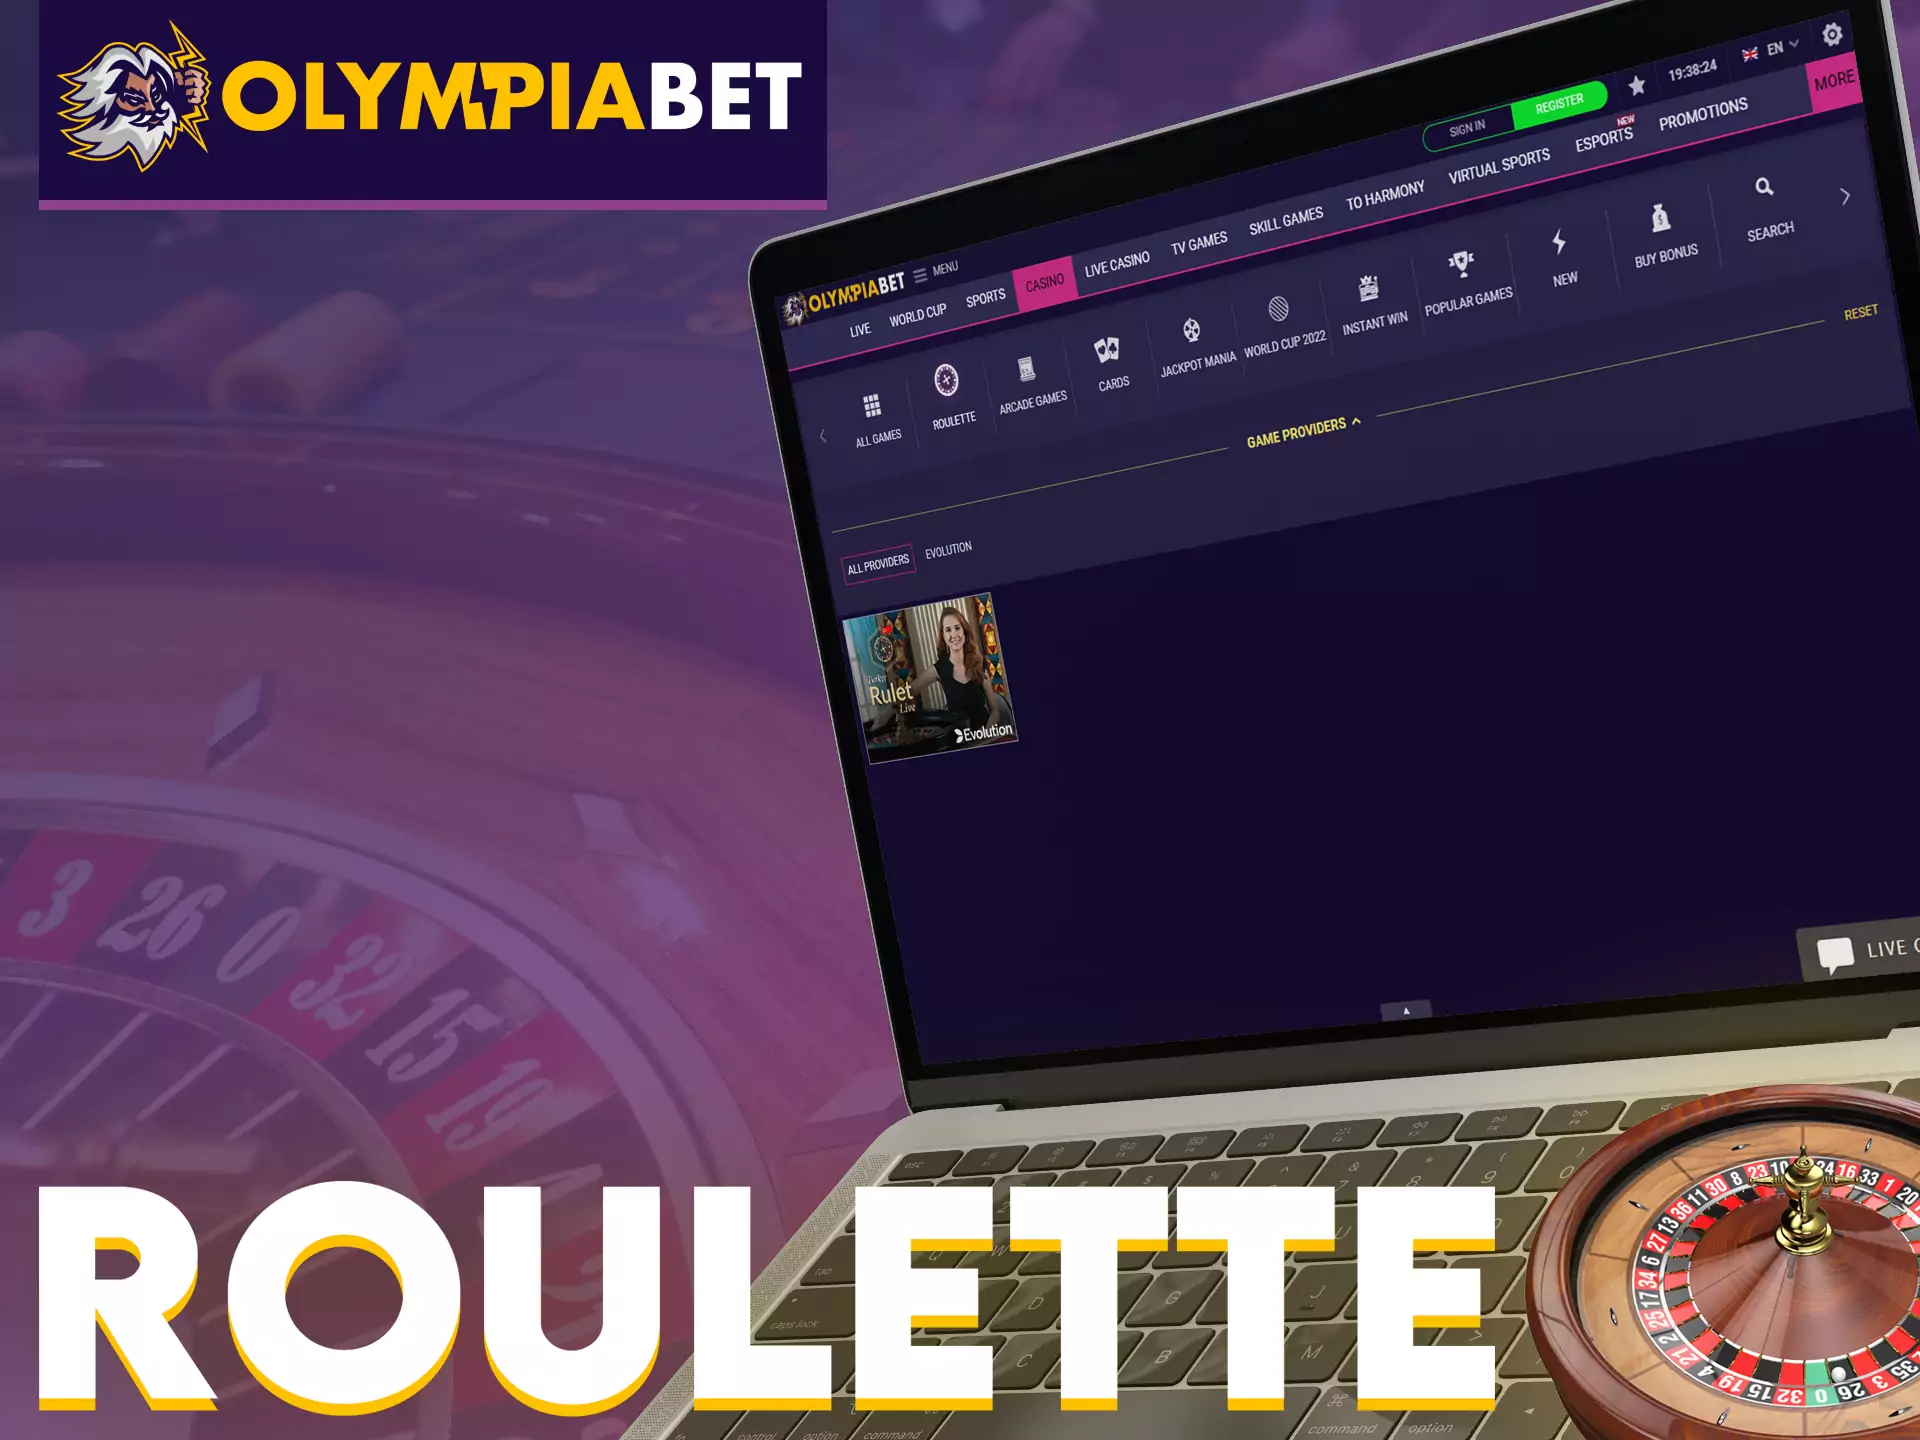 Try your luck on roulette at OlympiaBet Casino.